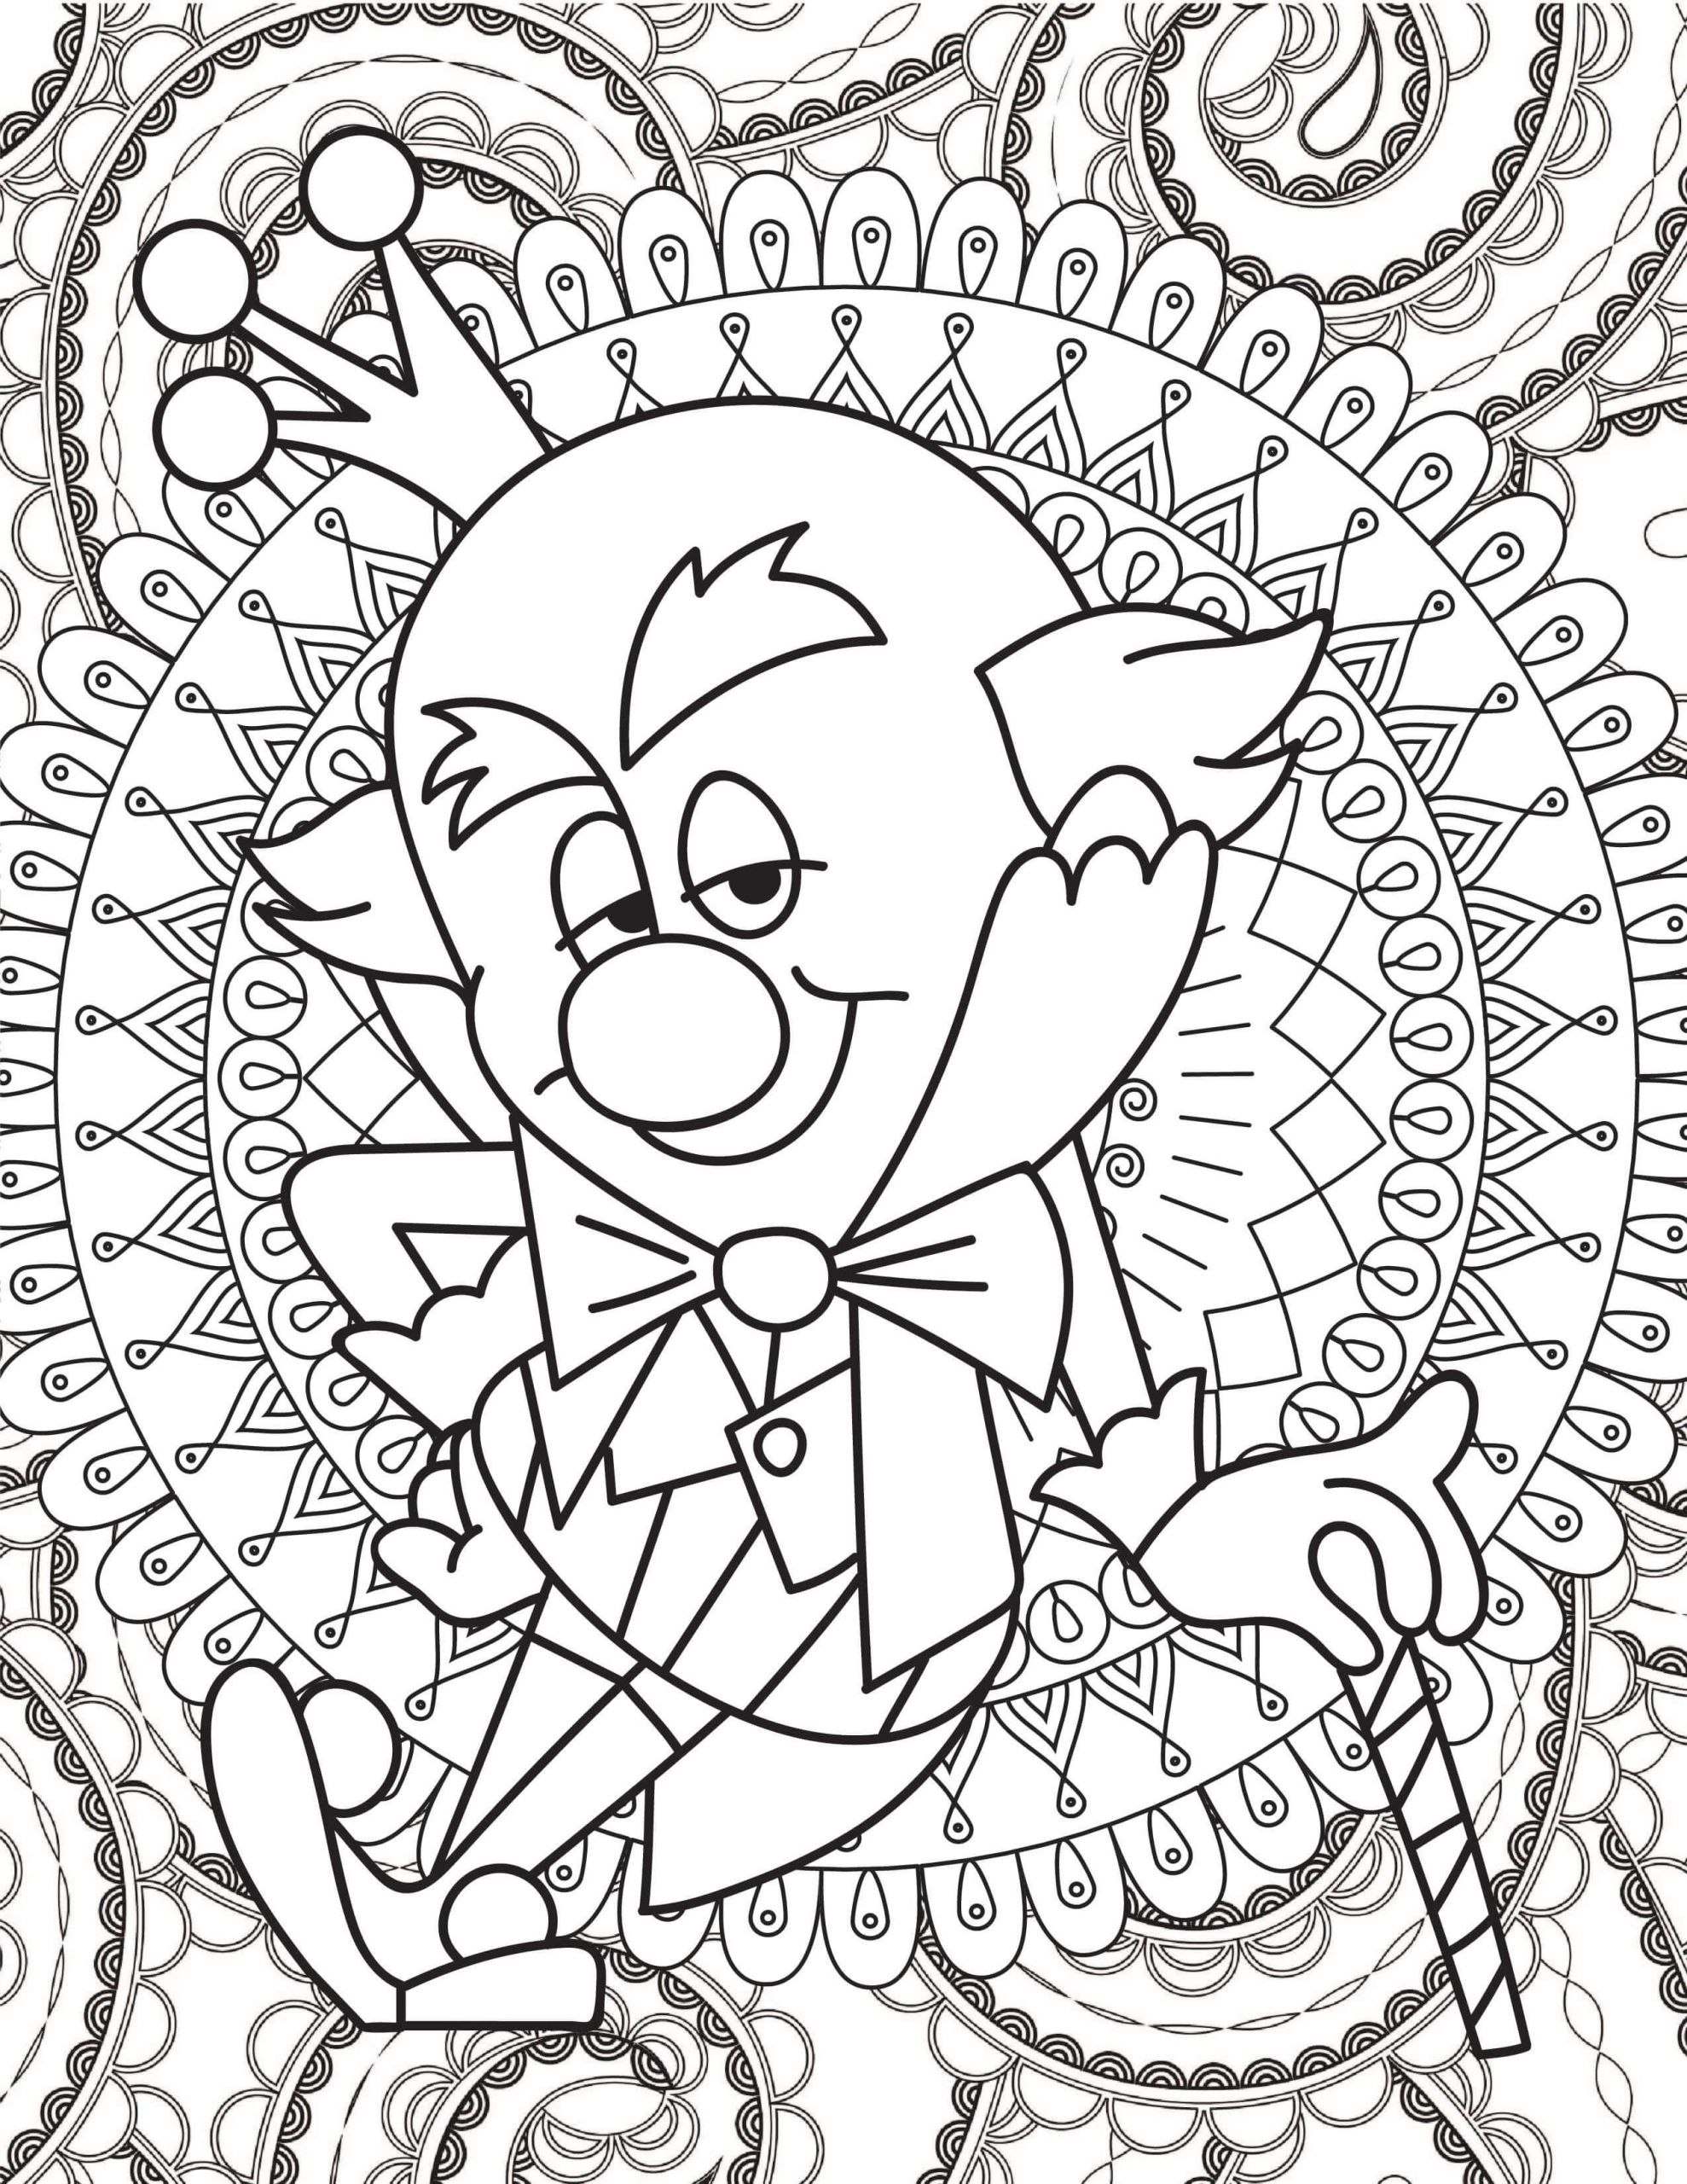 Free Printable Coloring Pages Disney
 Free Disney Pixar Printable Coloring Pages